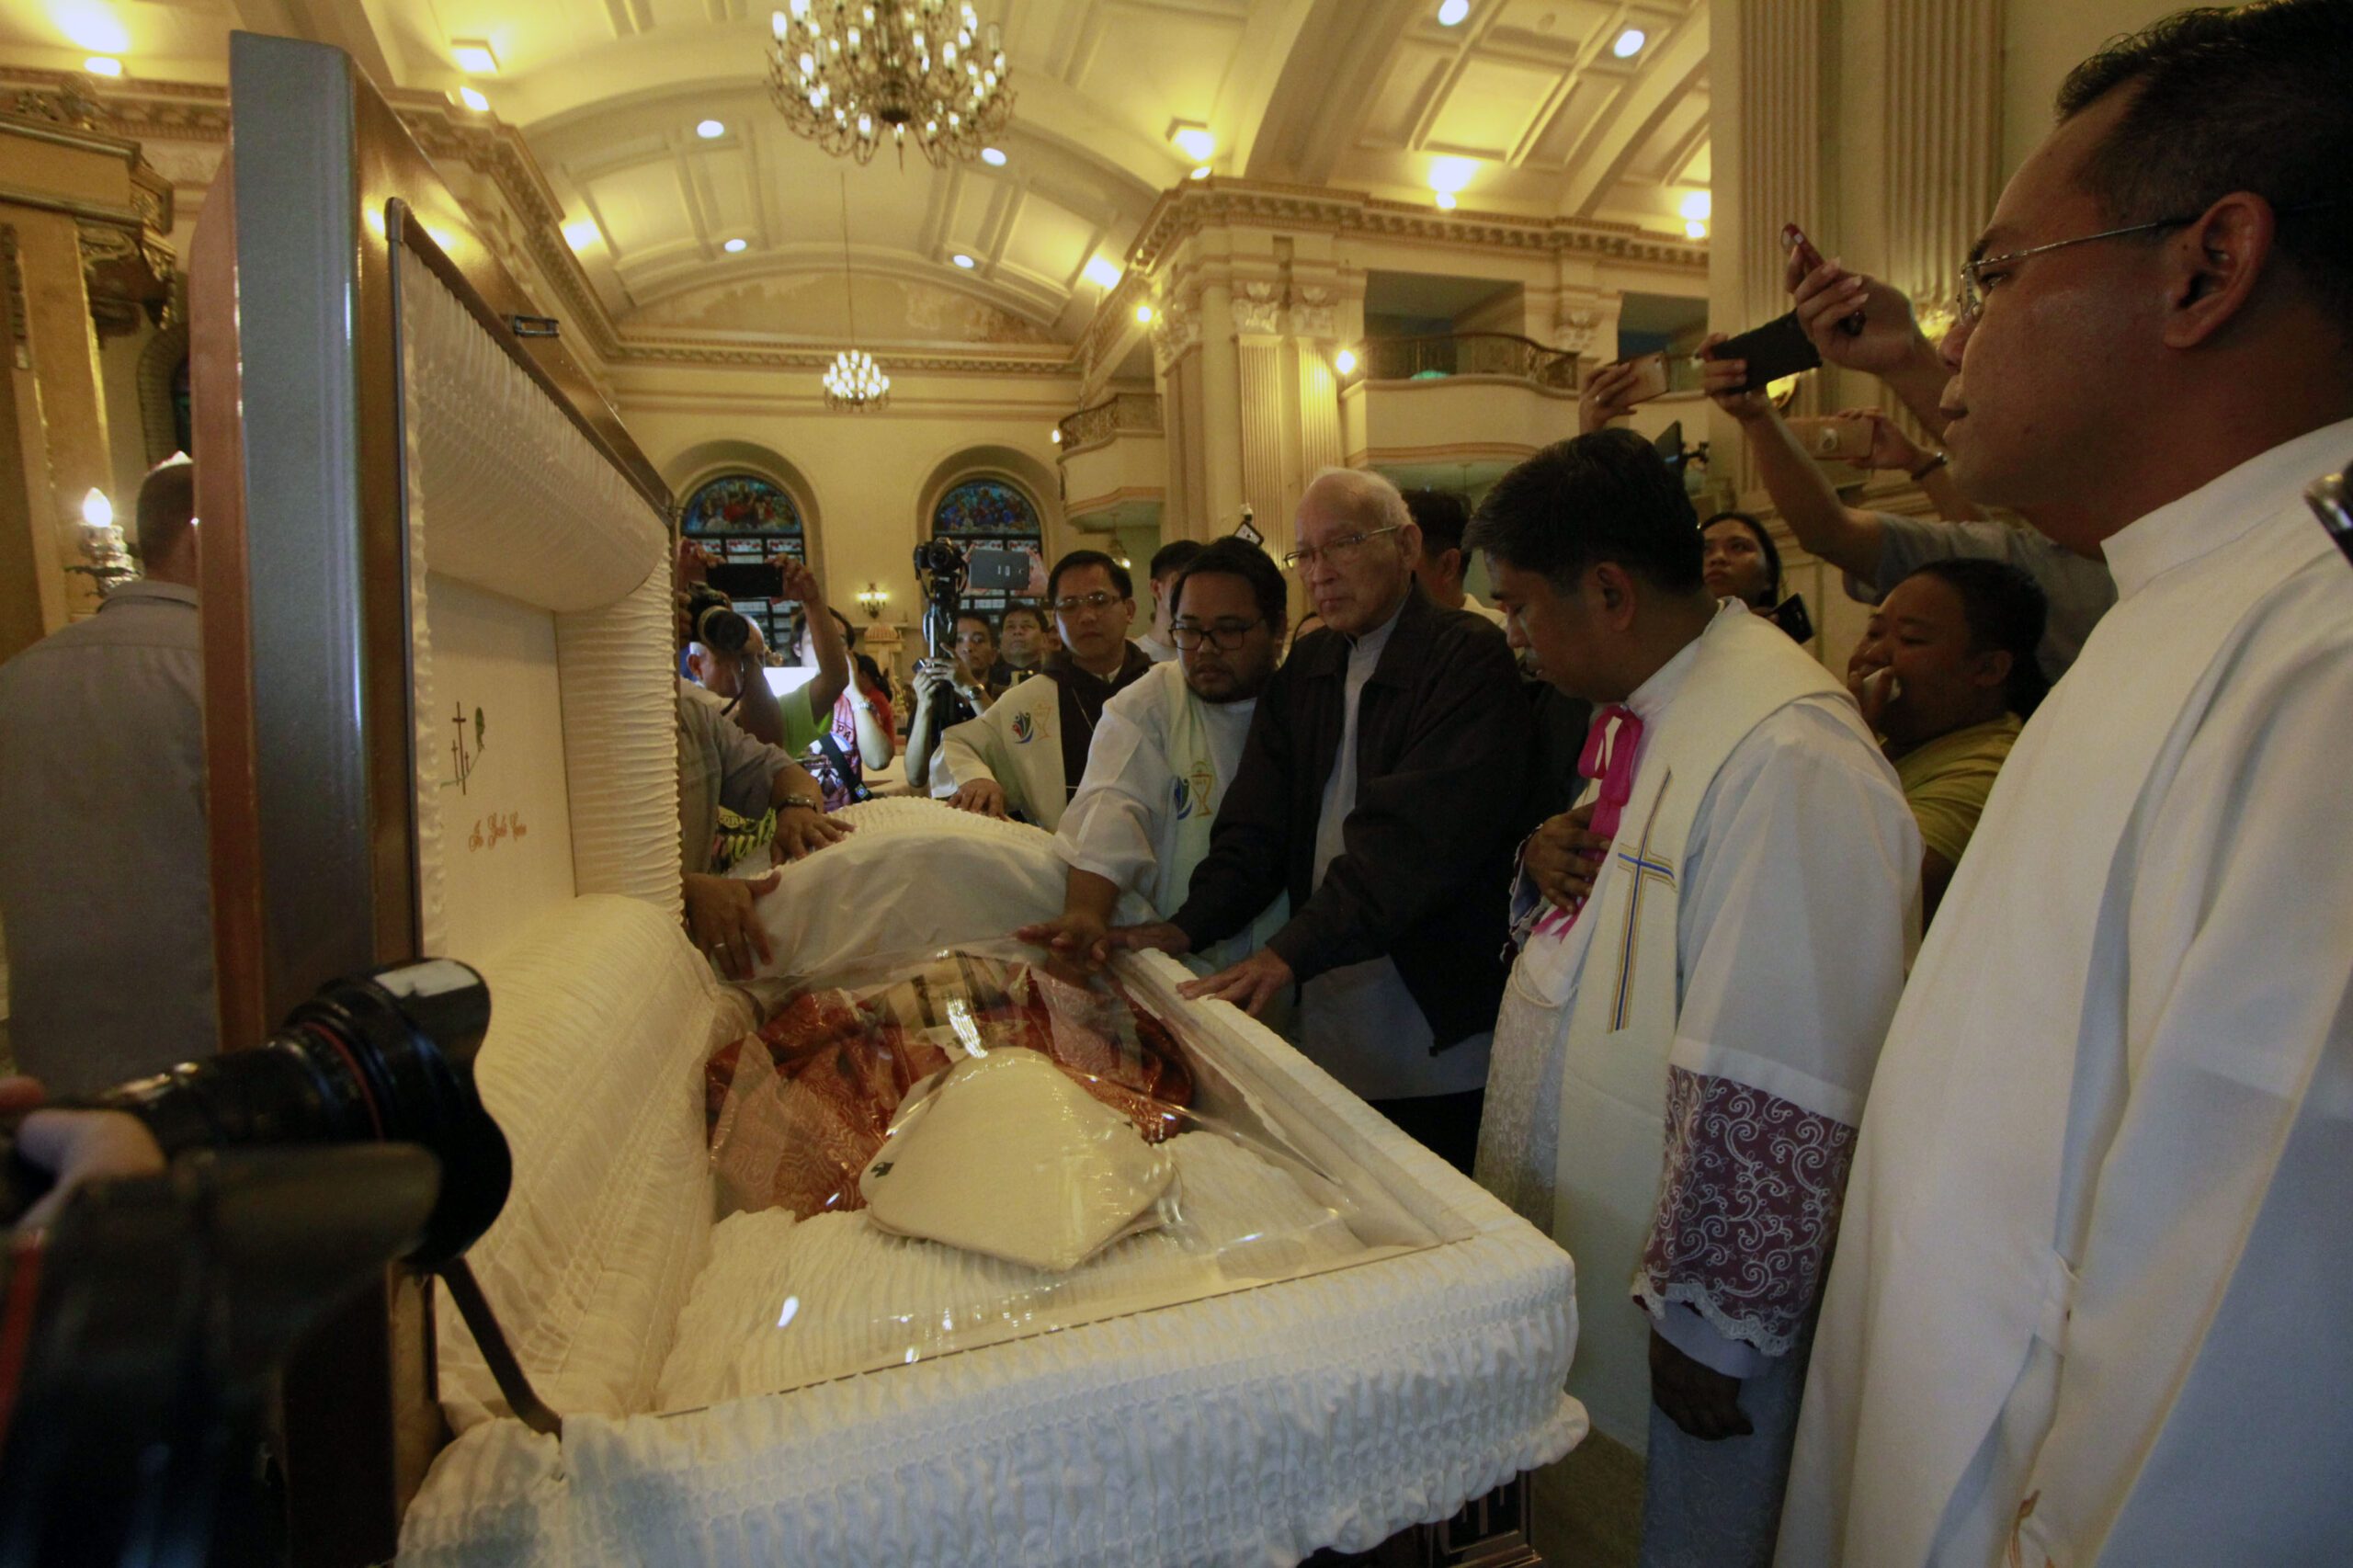 Funeral procession set for Cardinal Vidal’s burial on October 26